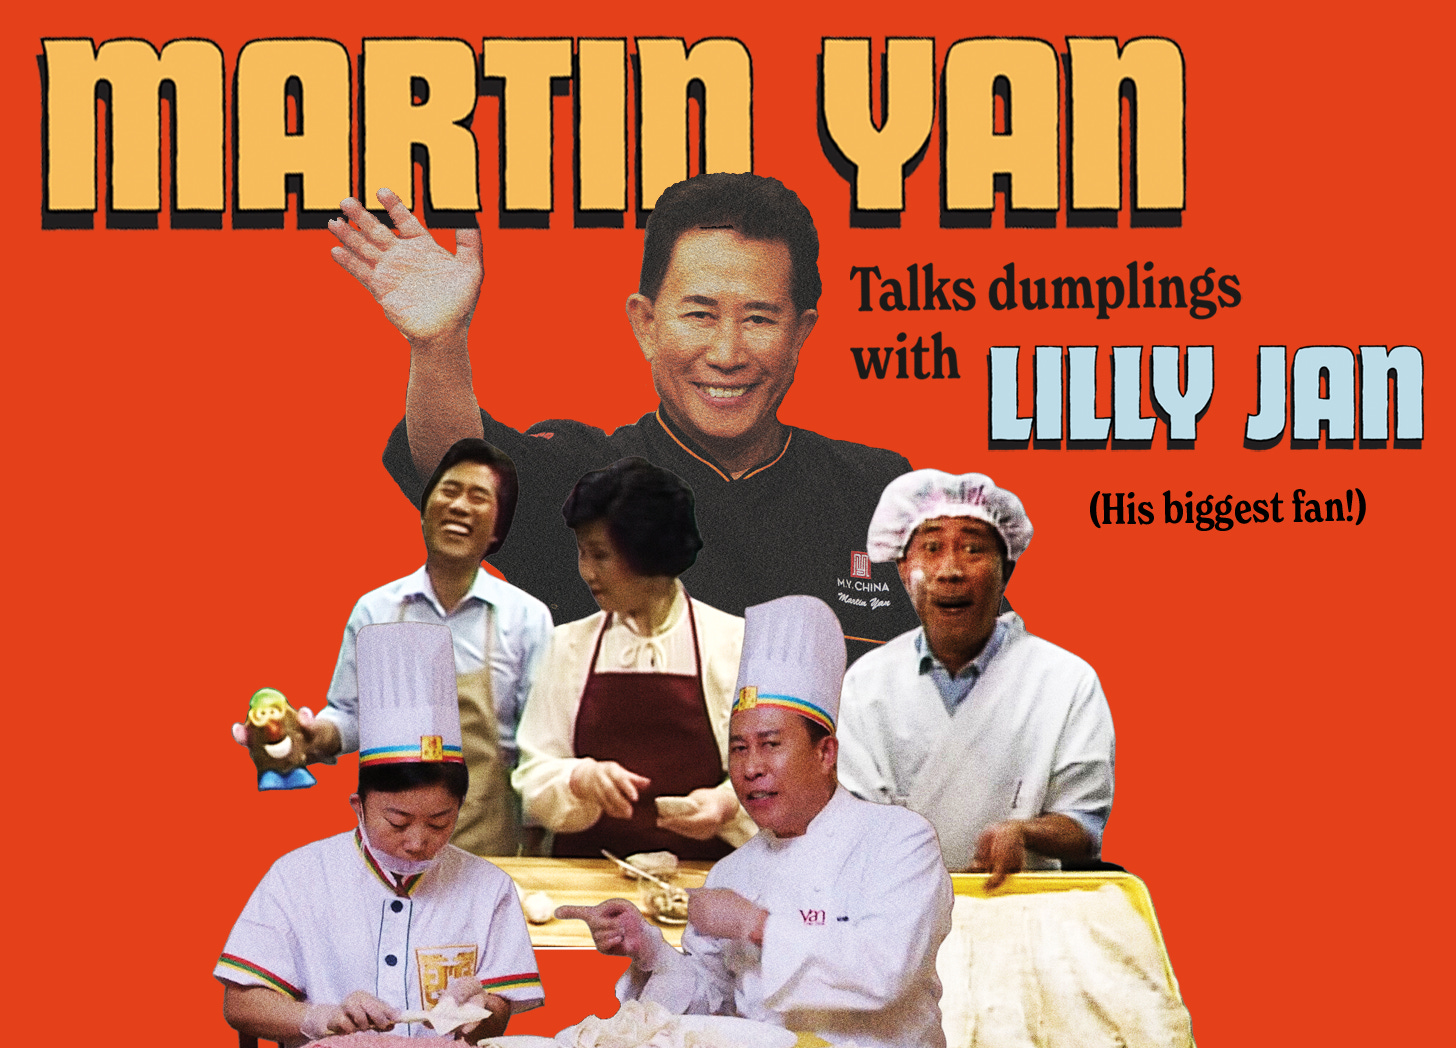 A collage of images of Martin Yan with text reading Martin Yan talks dumplings with Lilly Jan (his biggest fan!)